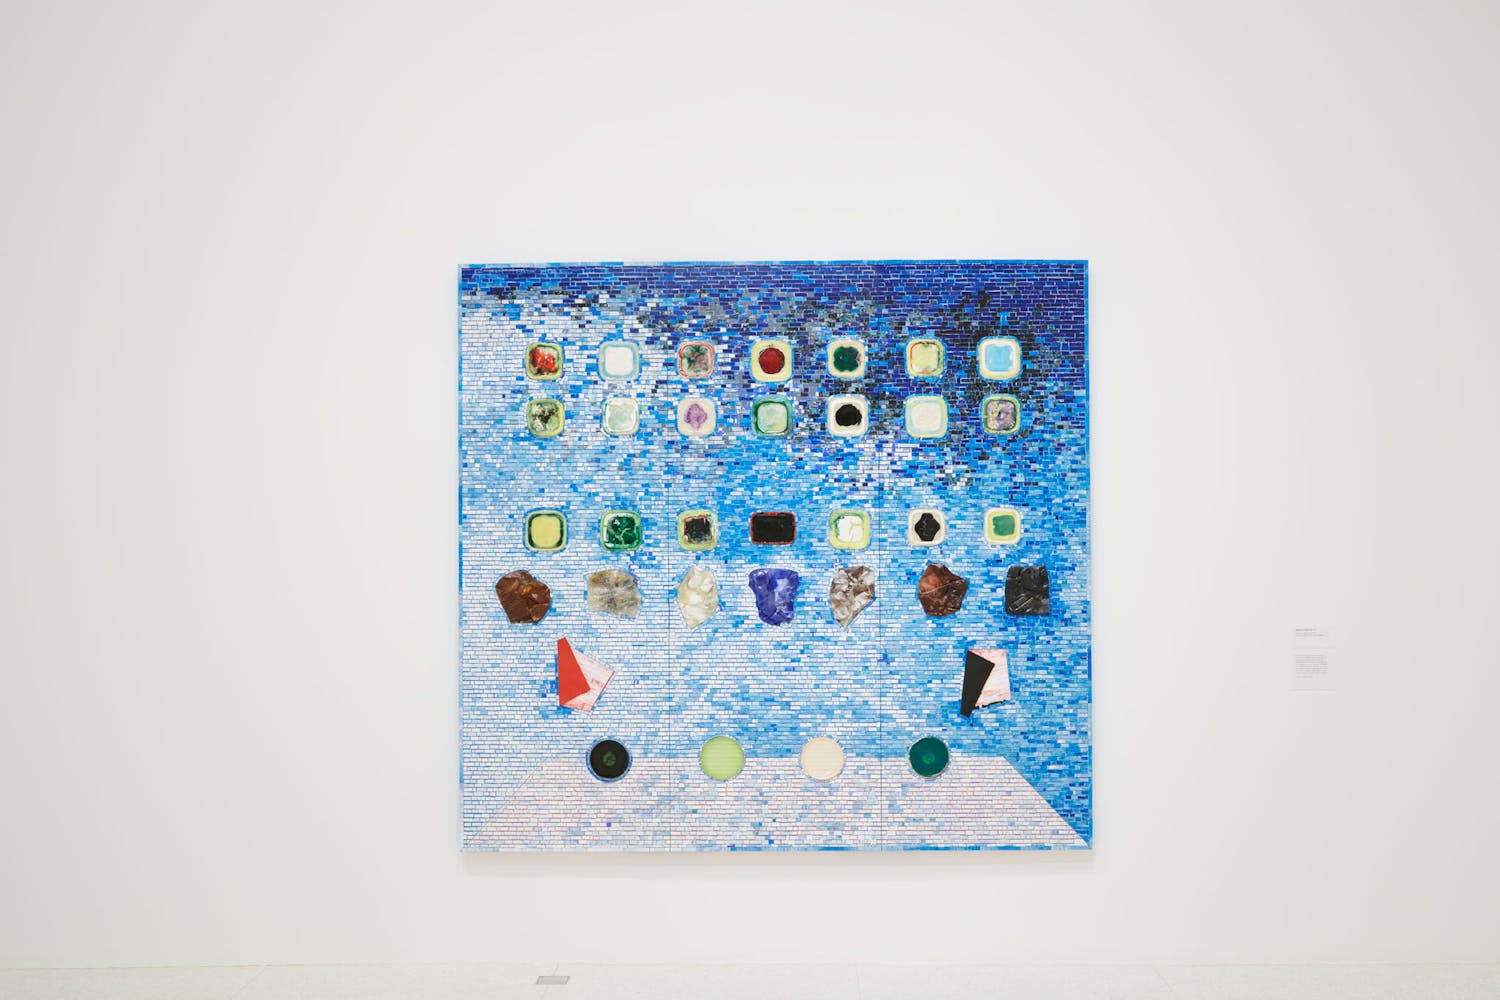 View of the exhibition Jack Whitten: Five Decades of Painting, 2015; Jack Whitten, Apps for Obama, 2011